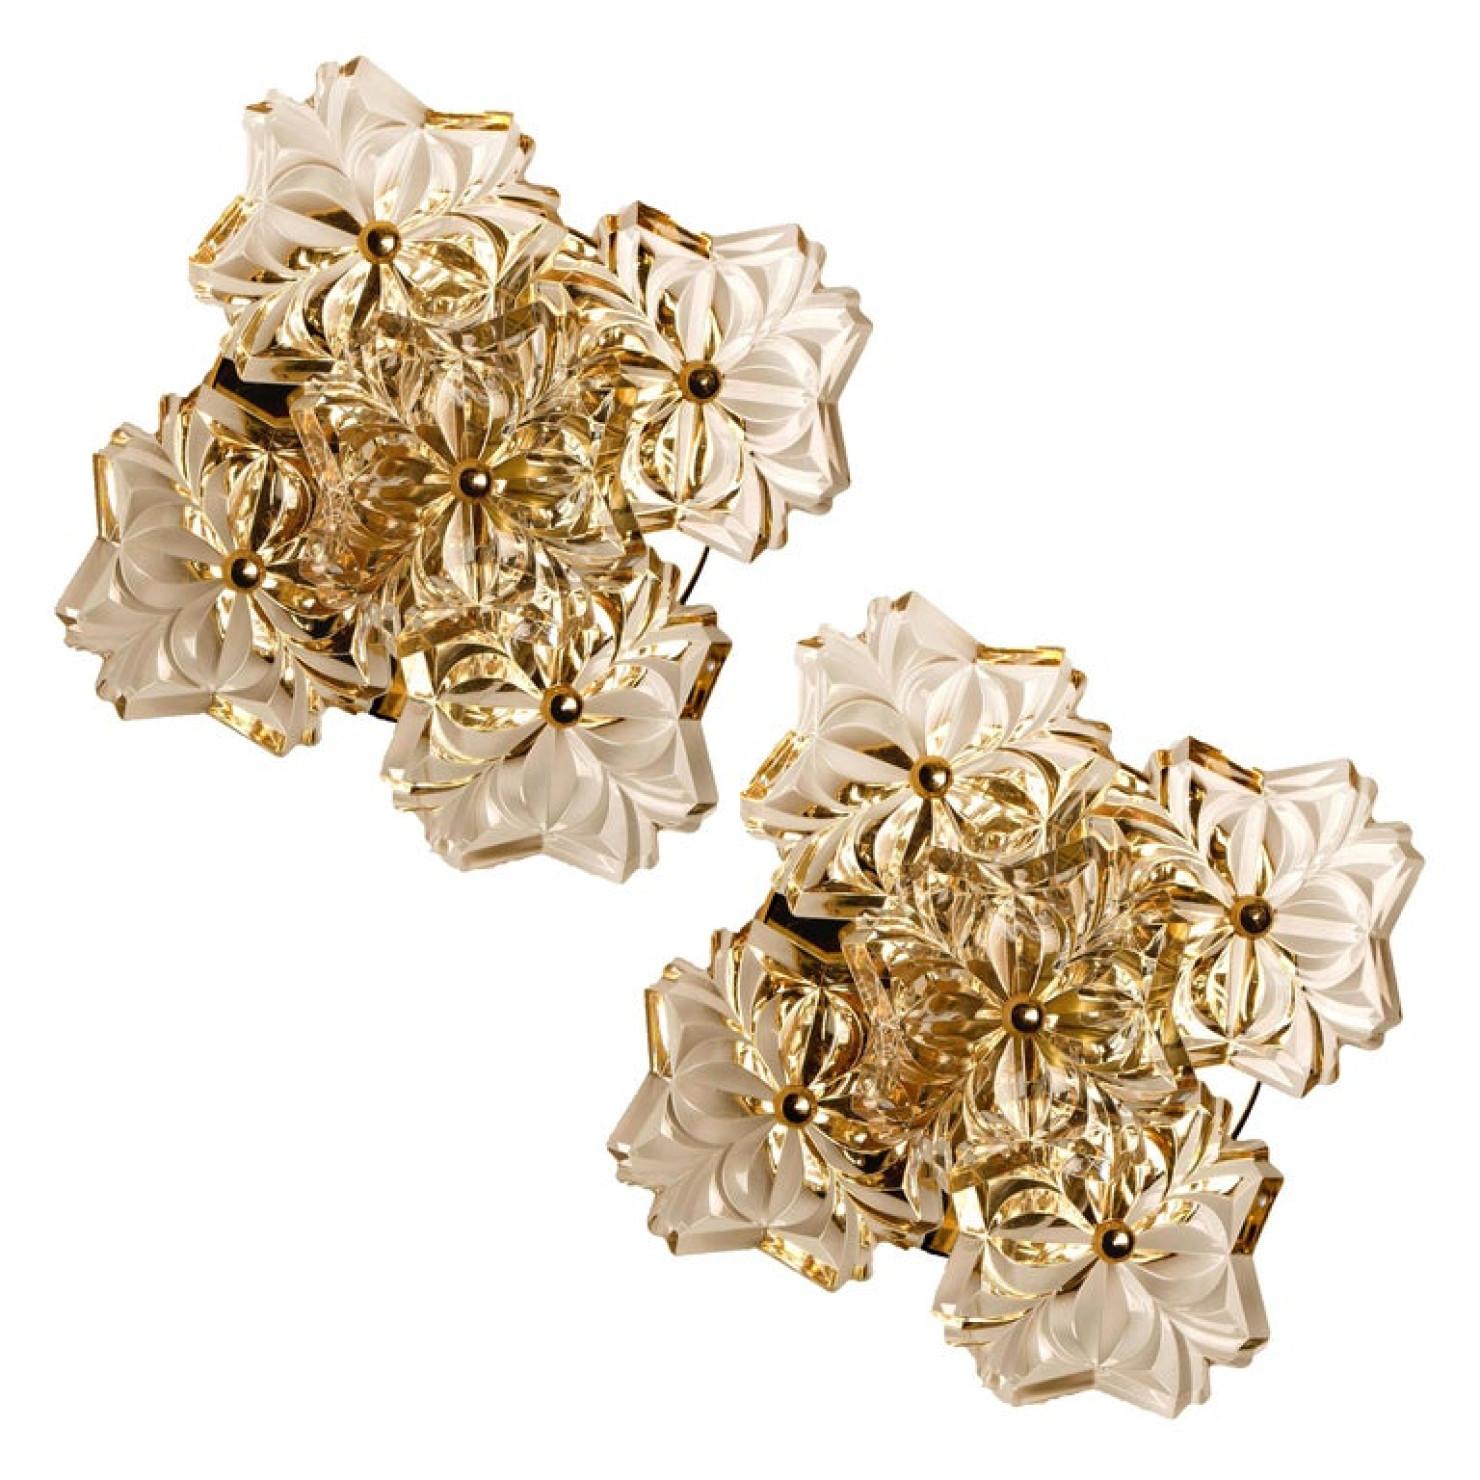 These sculptural wall sconces have the design of a bouquet of textured glass flowers and are from the historical lighting company Hillebrand. Each light has five glass shades. Flower shaped.

Each clear glass flower shade has textured petals and is